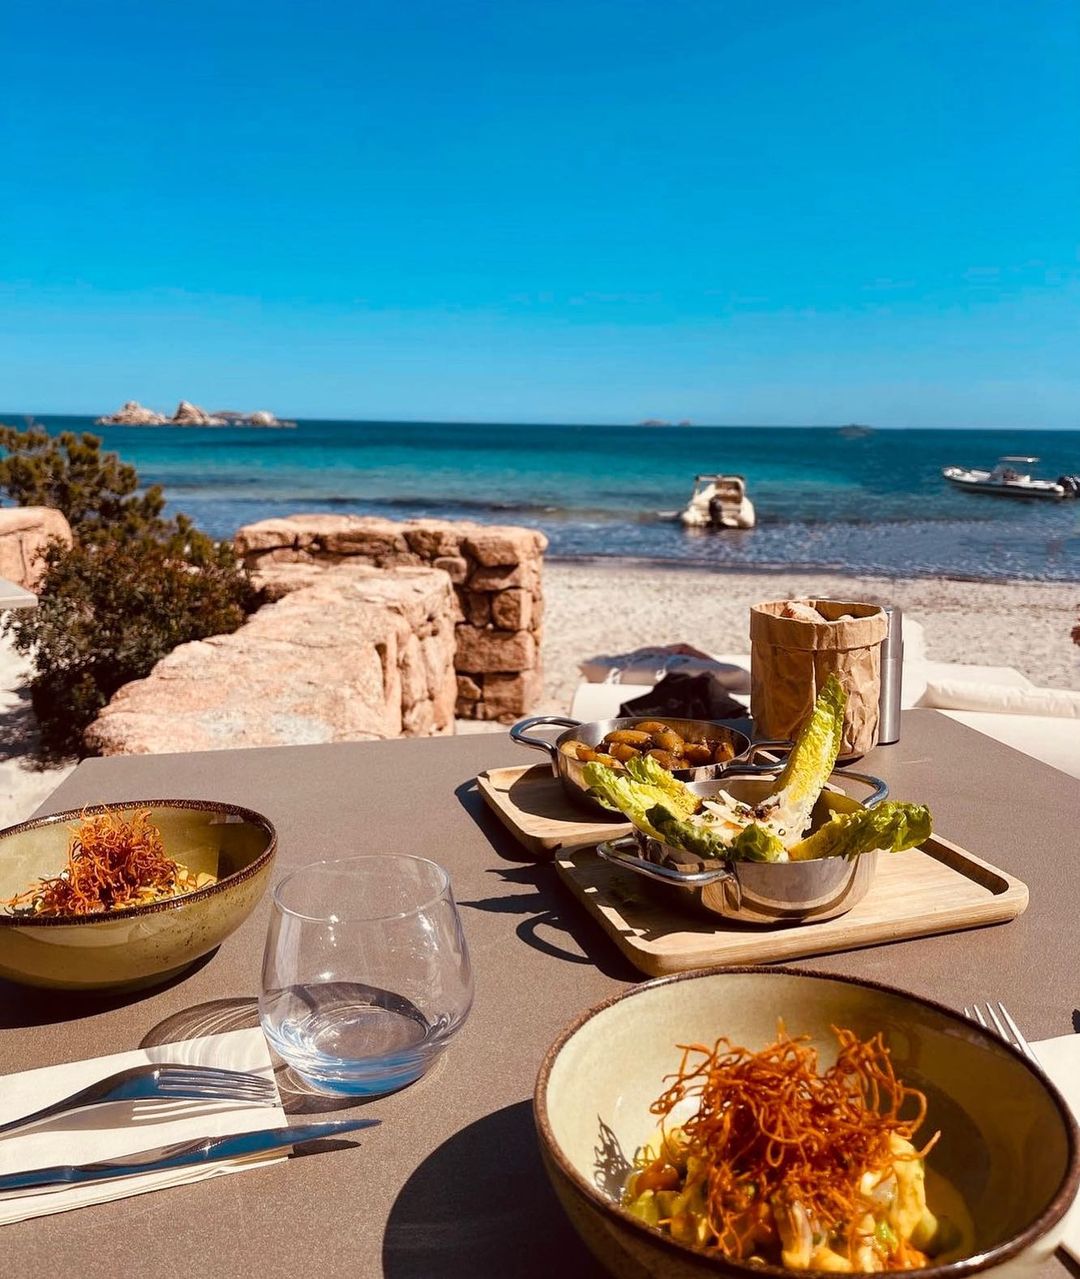 Incredible lunch view at Sea Lounge, Corsica - Best Beach Restaurants in Europe